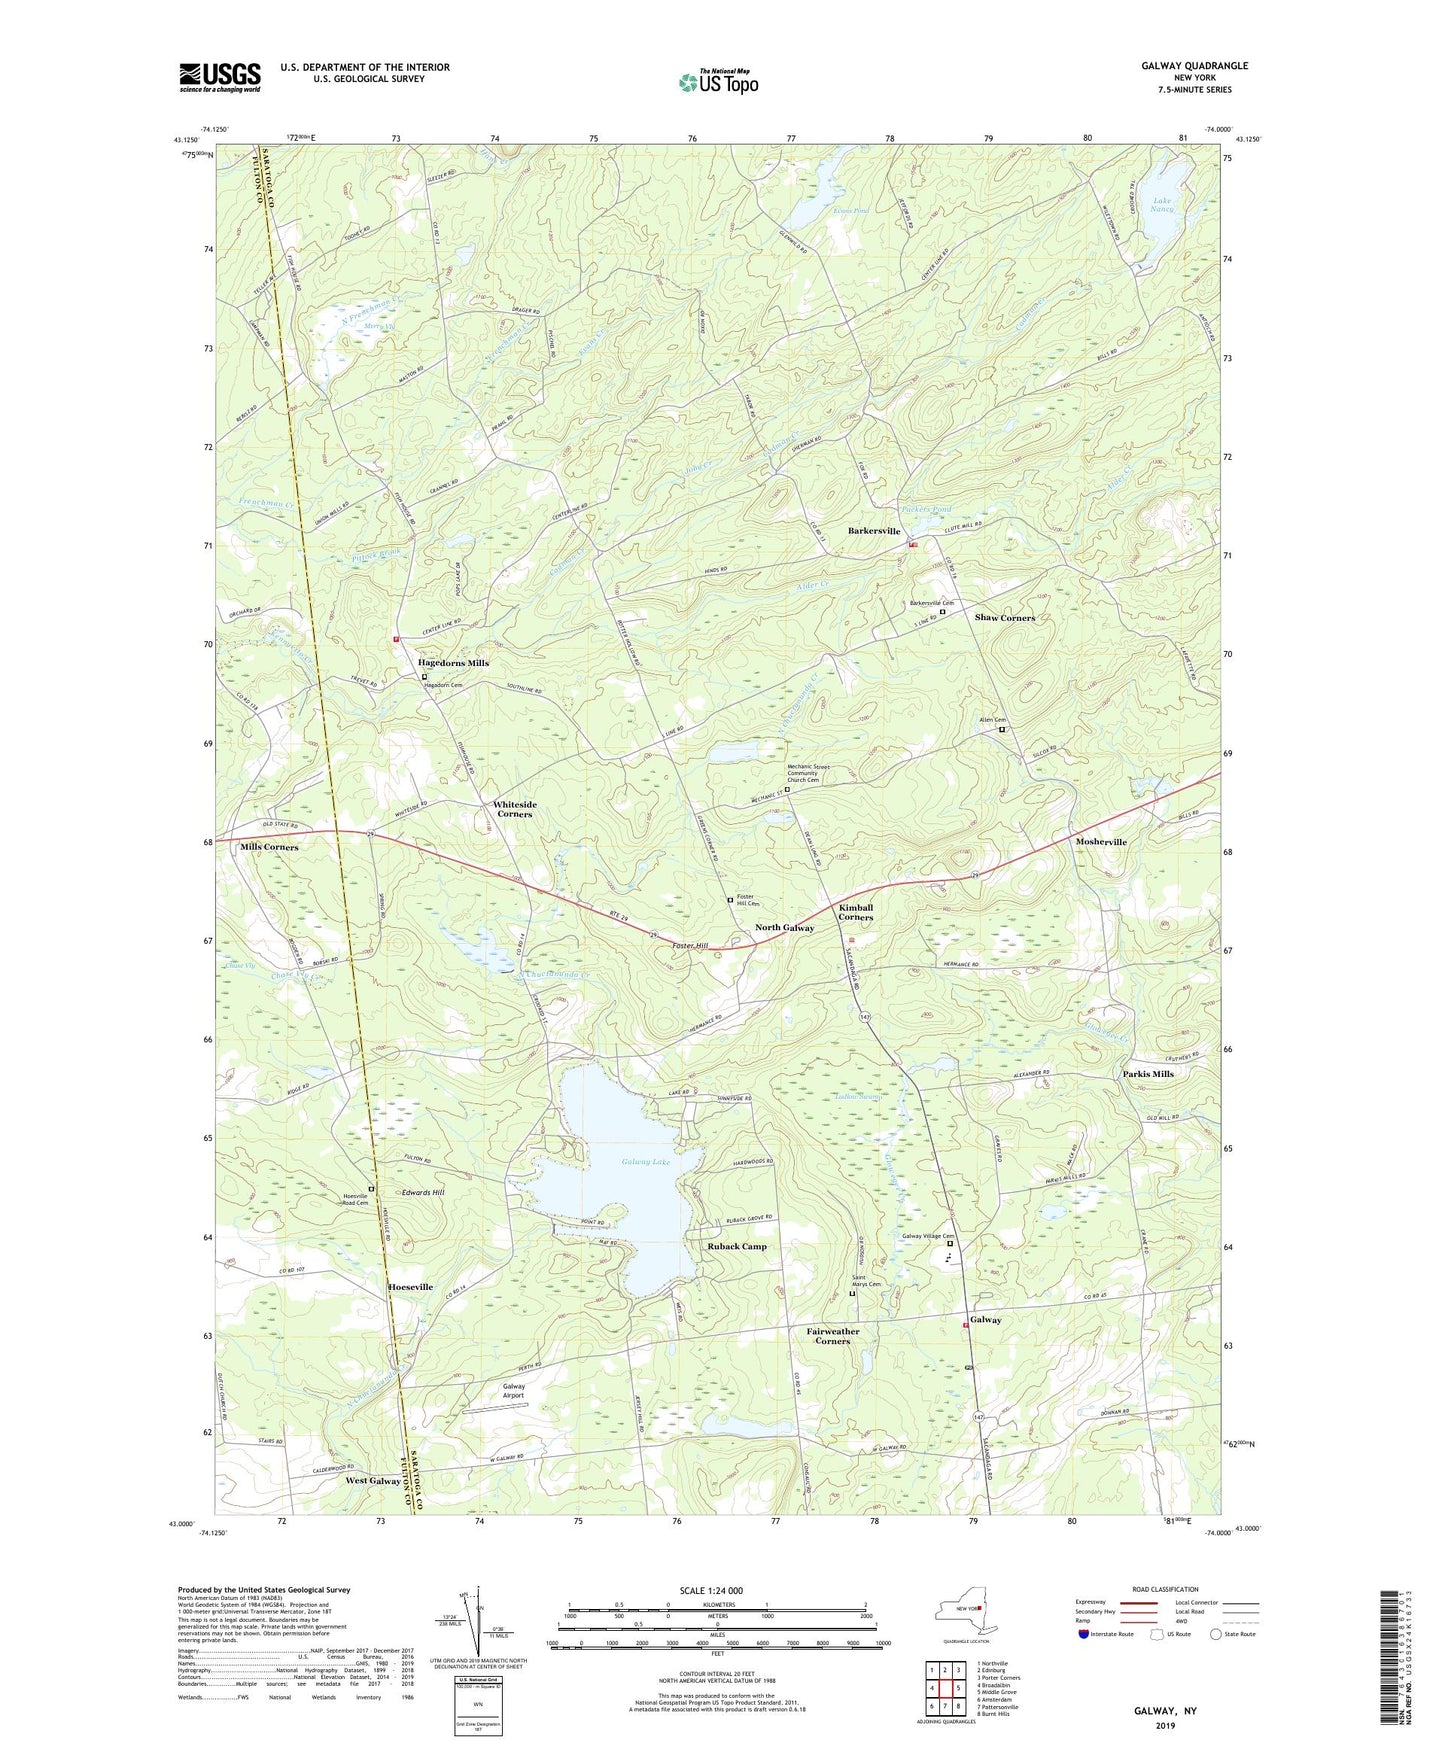 Galway New York US Topo Map Image